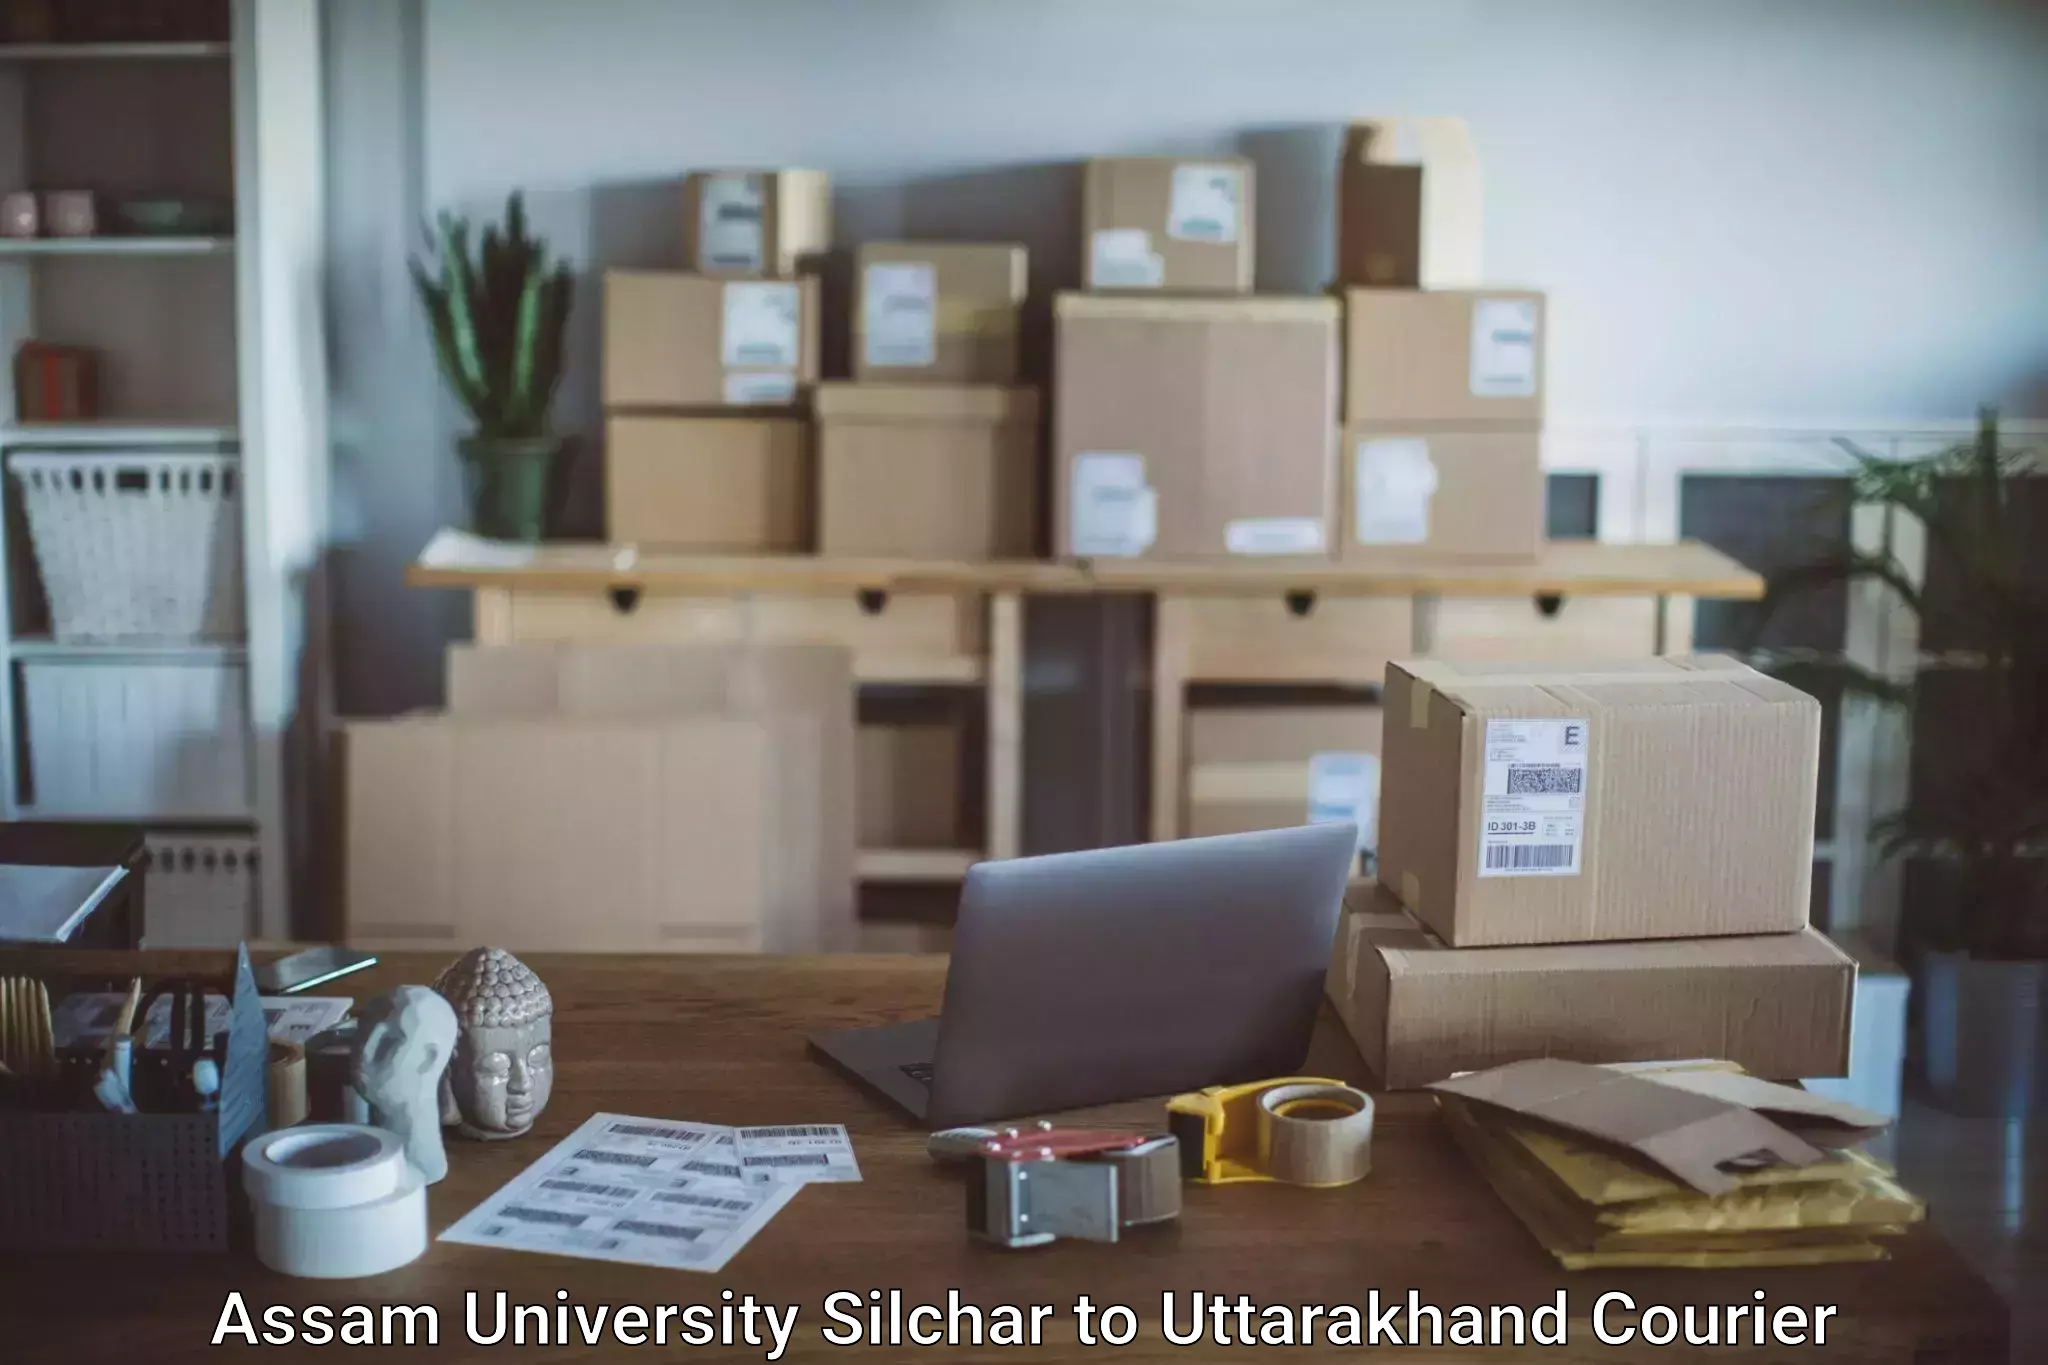 Baggage shipping service Assam University Silchar to Tanakpur